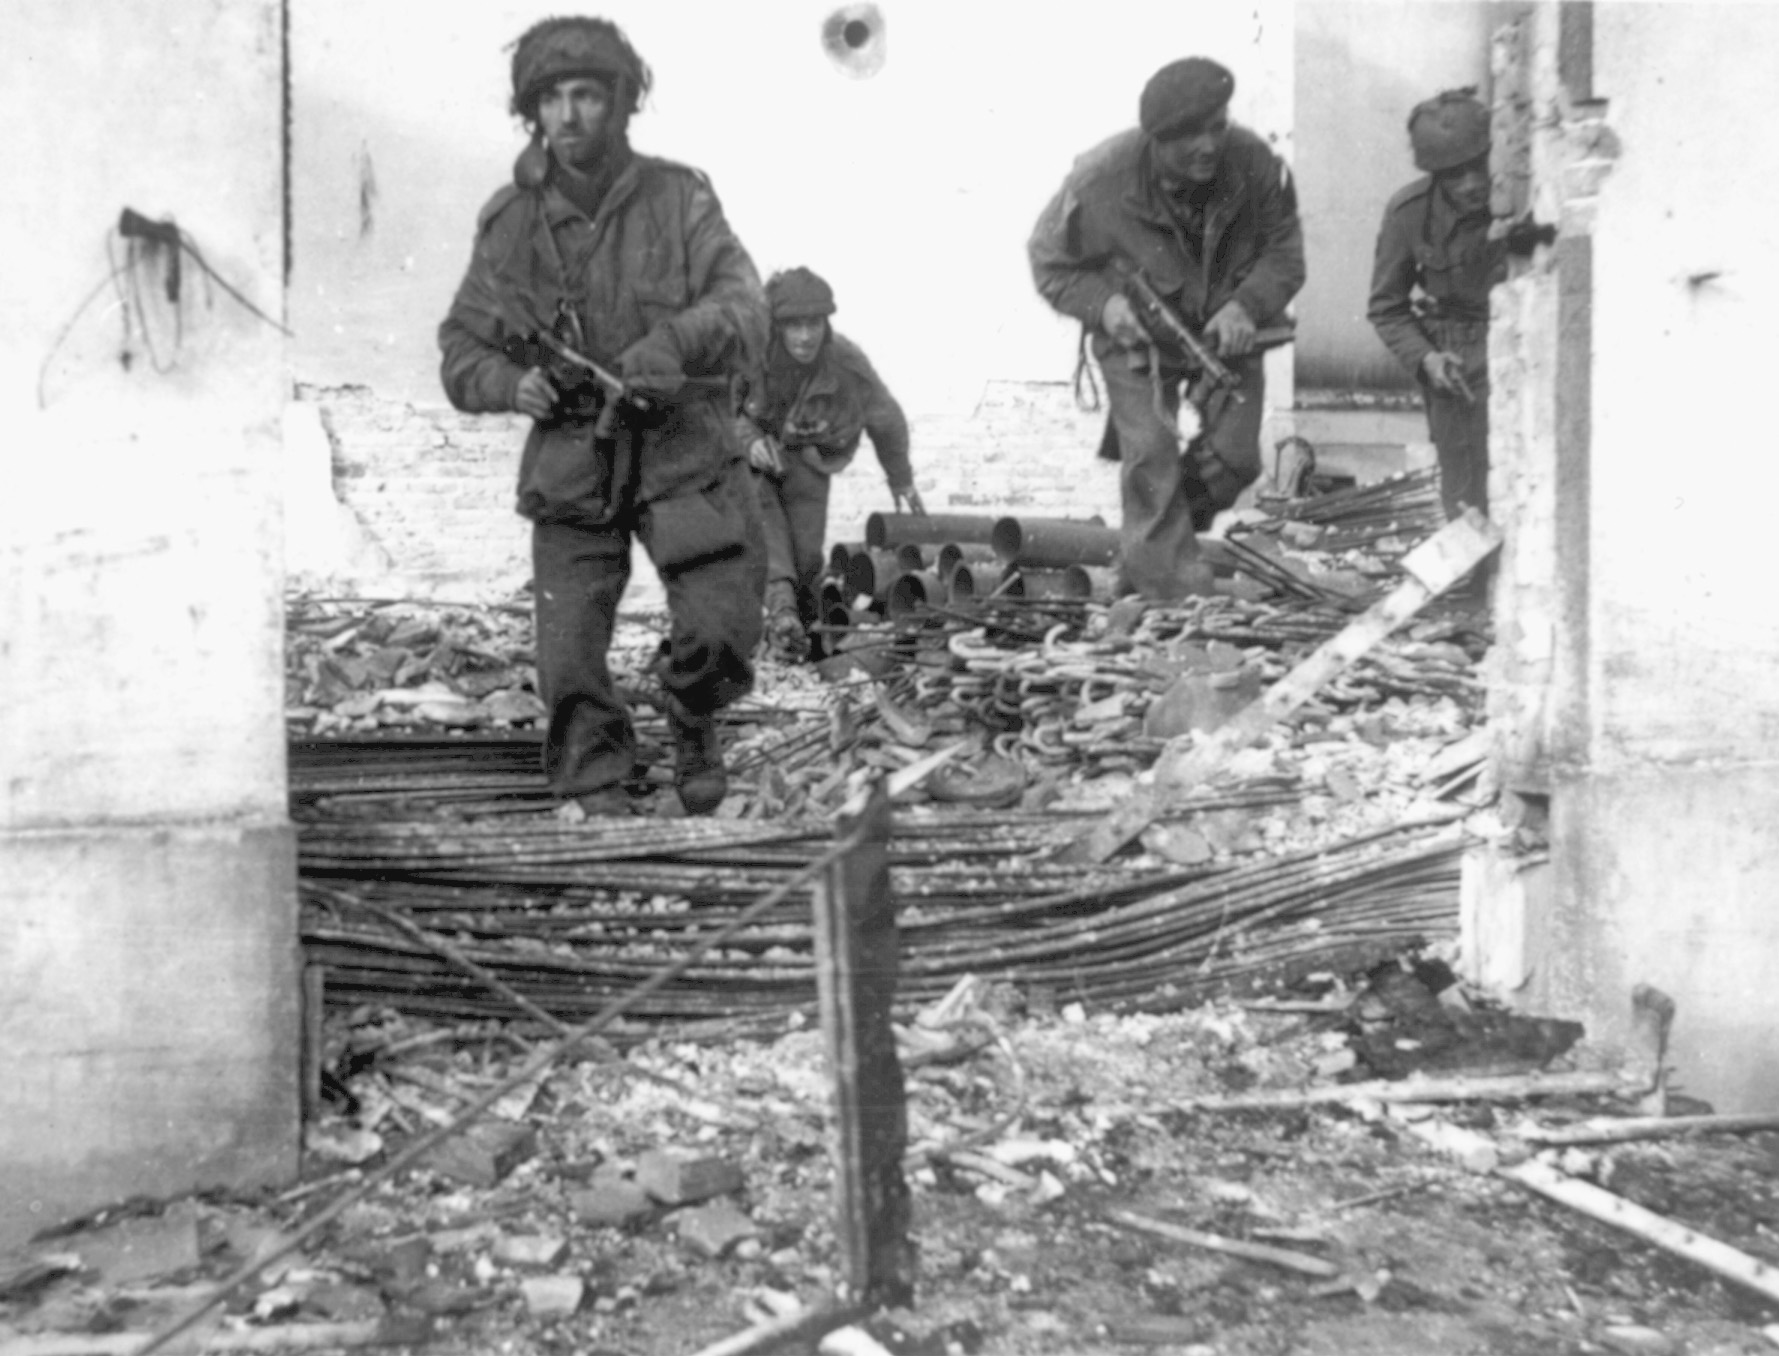 The British patrol through ruined homes in Oosterbeek near Arnhem. By the 25th of September when this picture was taken, the British perimeter was small. 